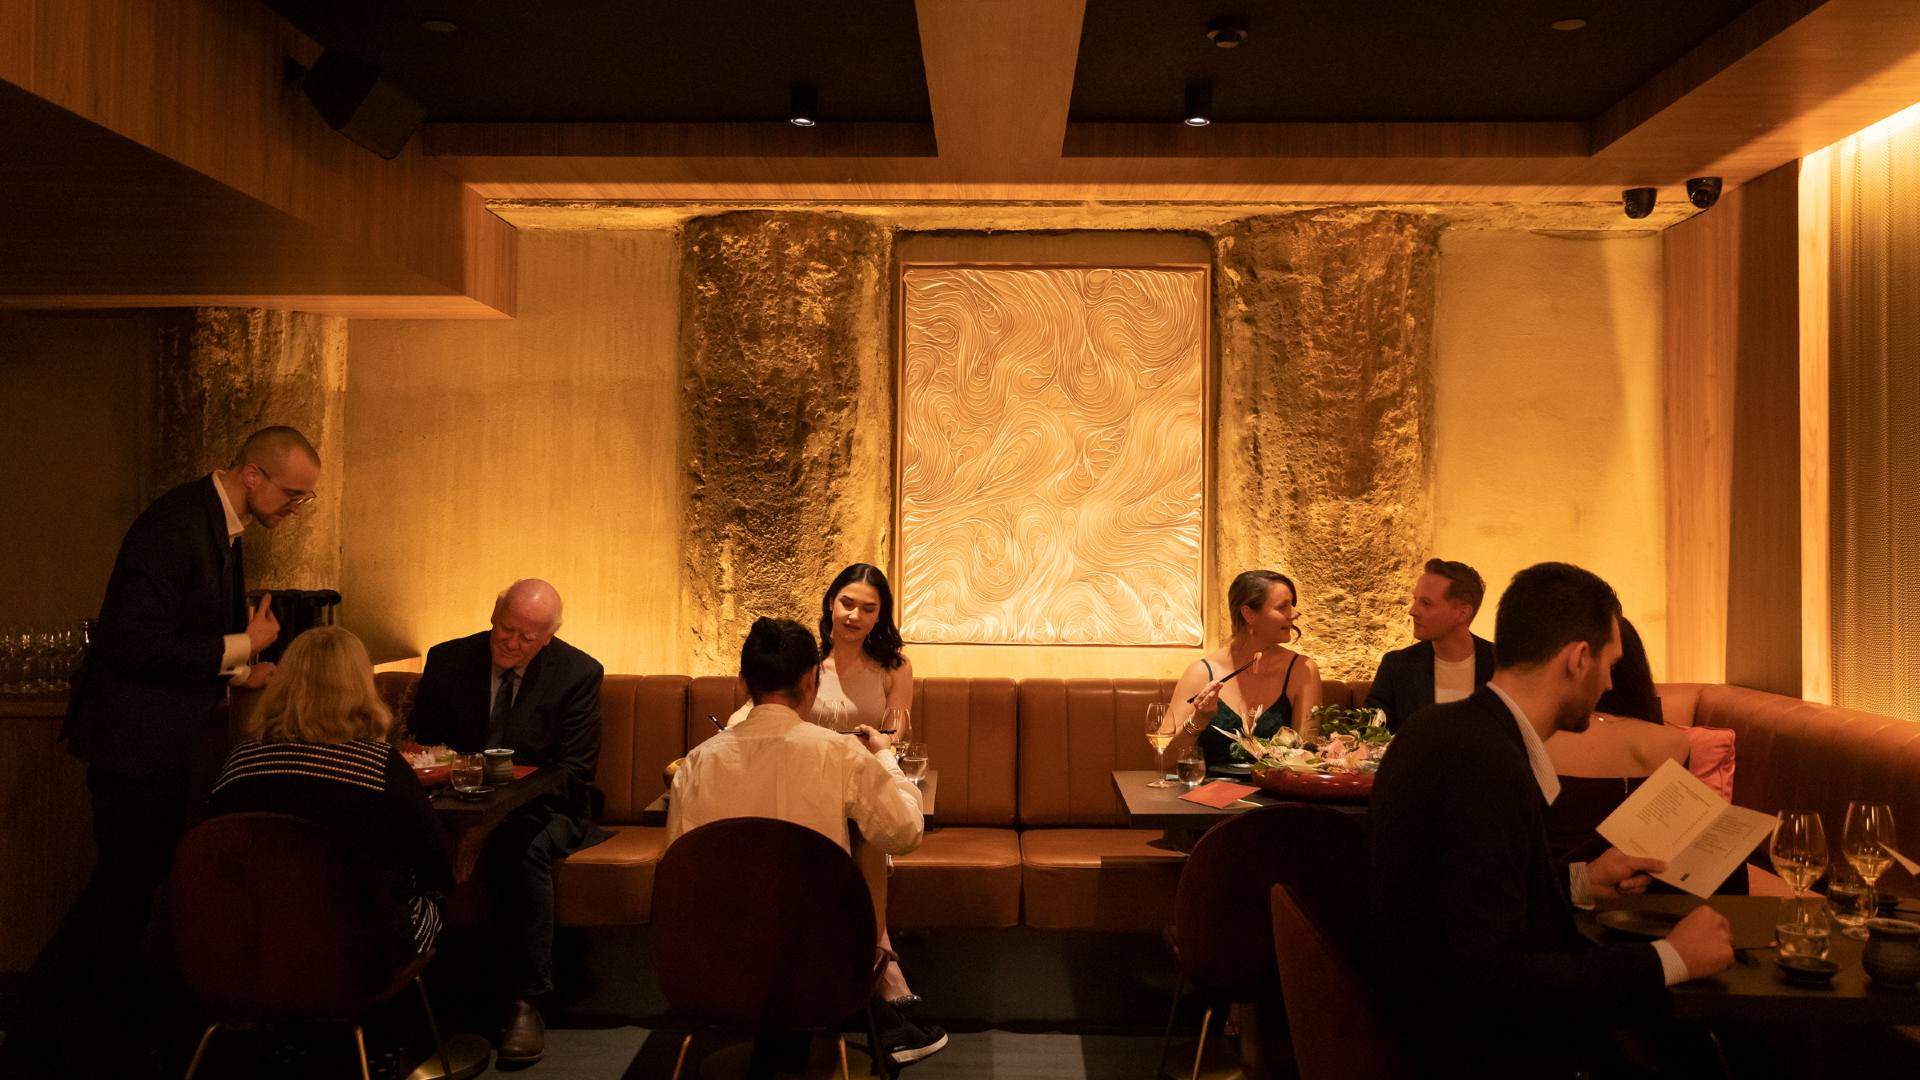 Melbourne Bars and Restaurants That Are Undeniably, Unabashedly Romantic